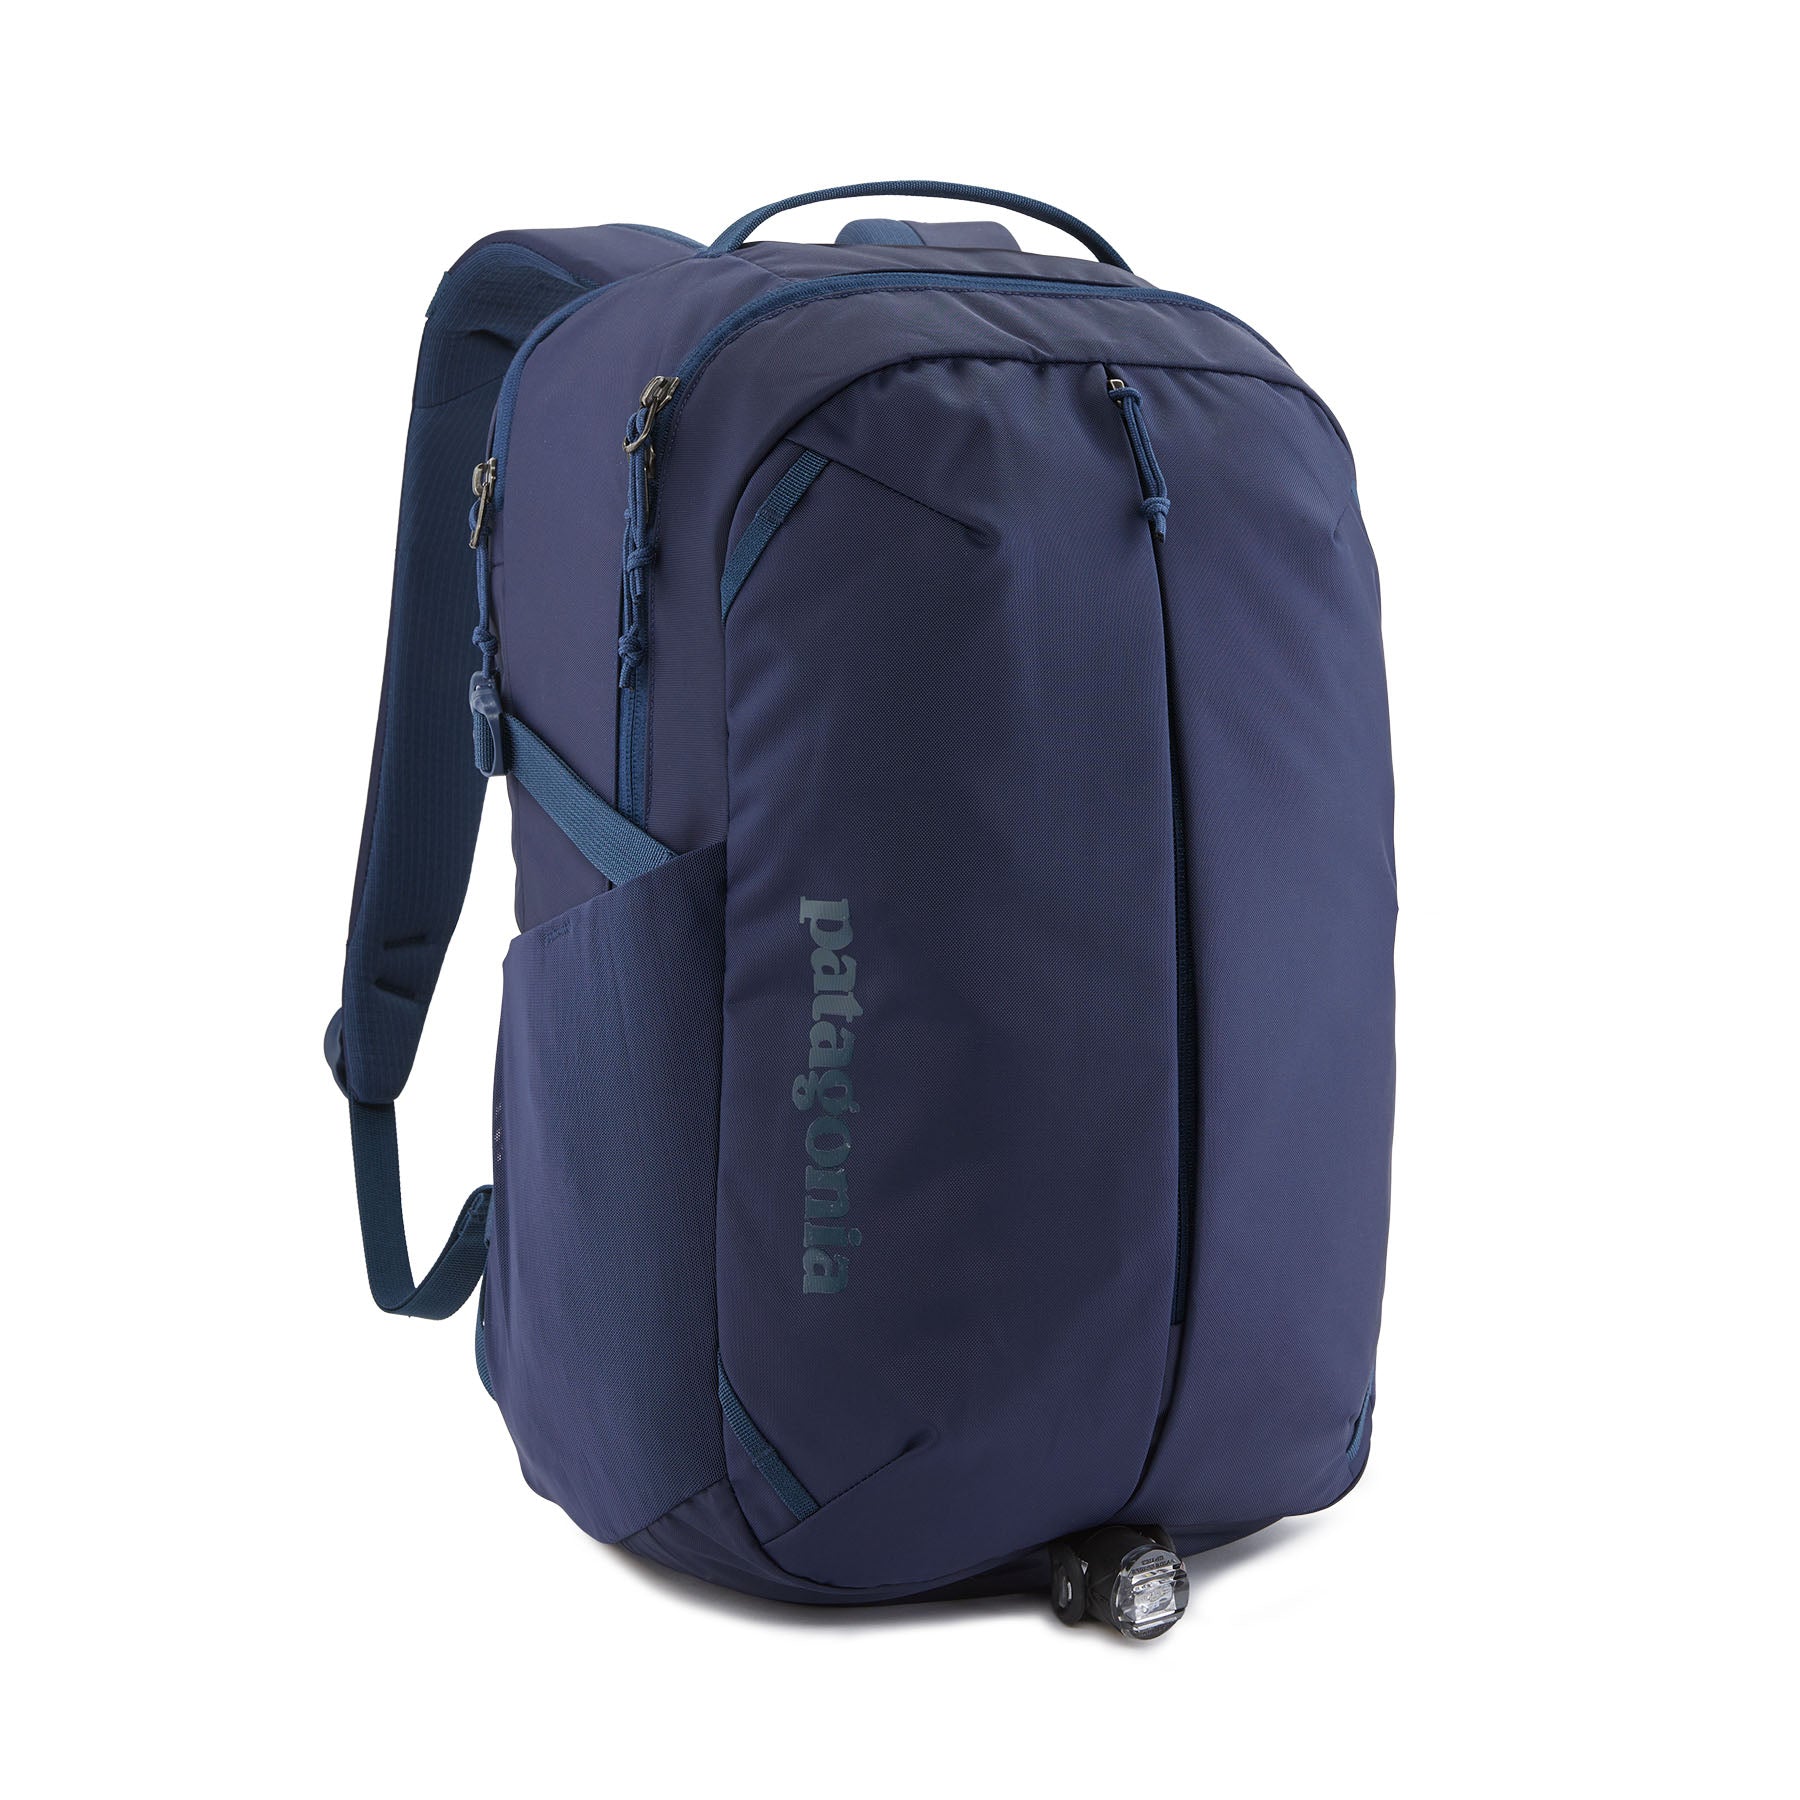 Refugio Day Pack 26L - Recycled Polyester - Anacapa Blue